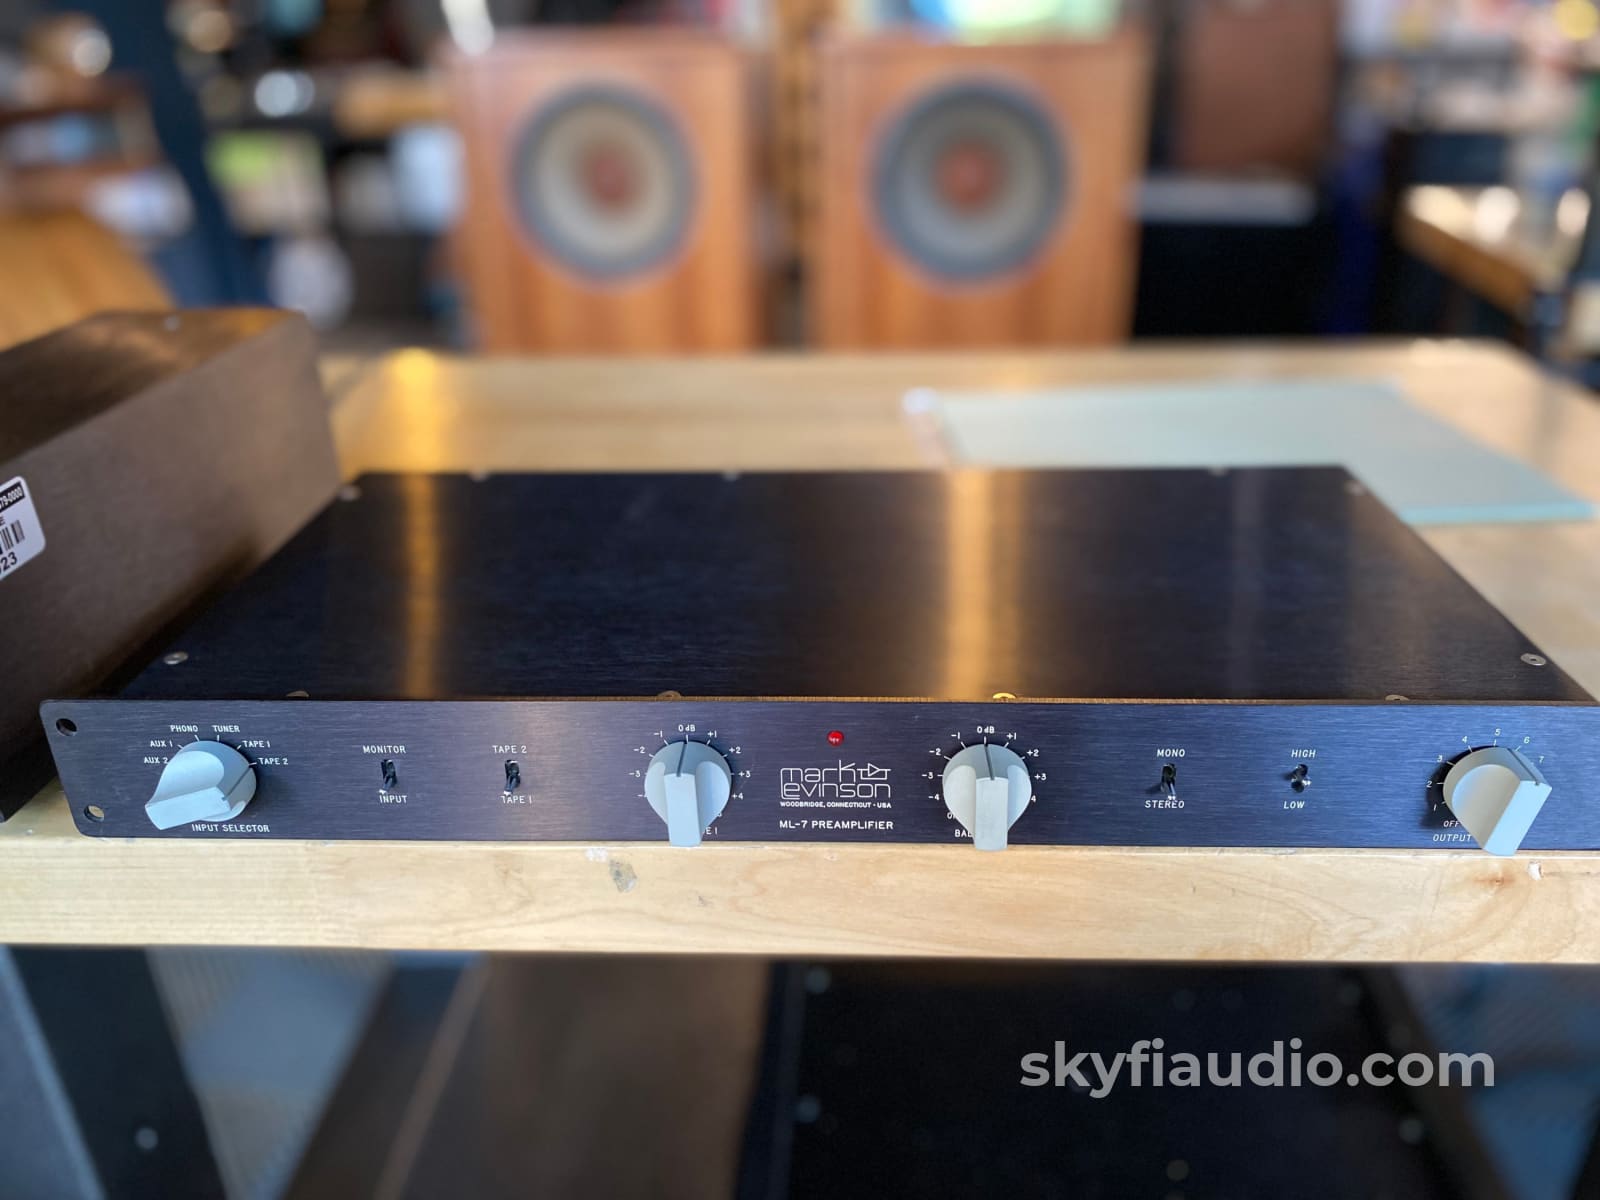 Mark Levinson Ml-7 Vintage Preamplifier With Phono Section - Super Clean